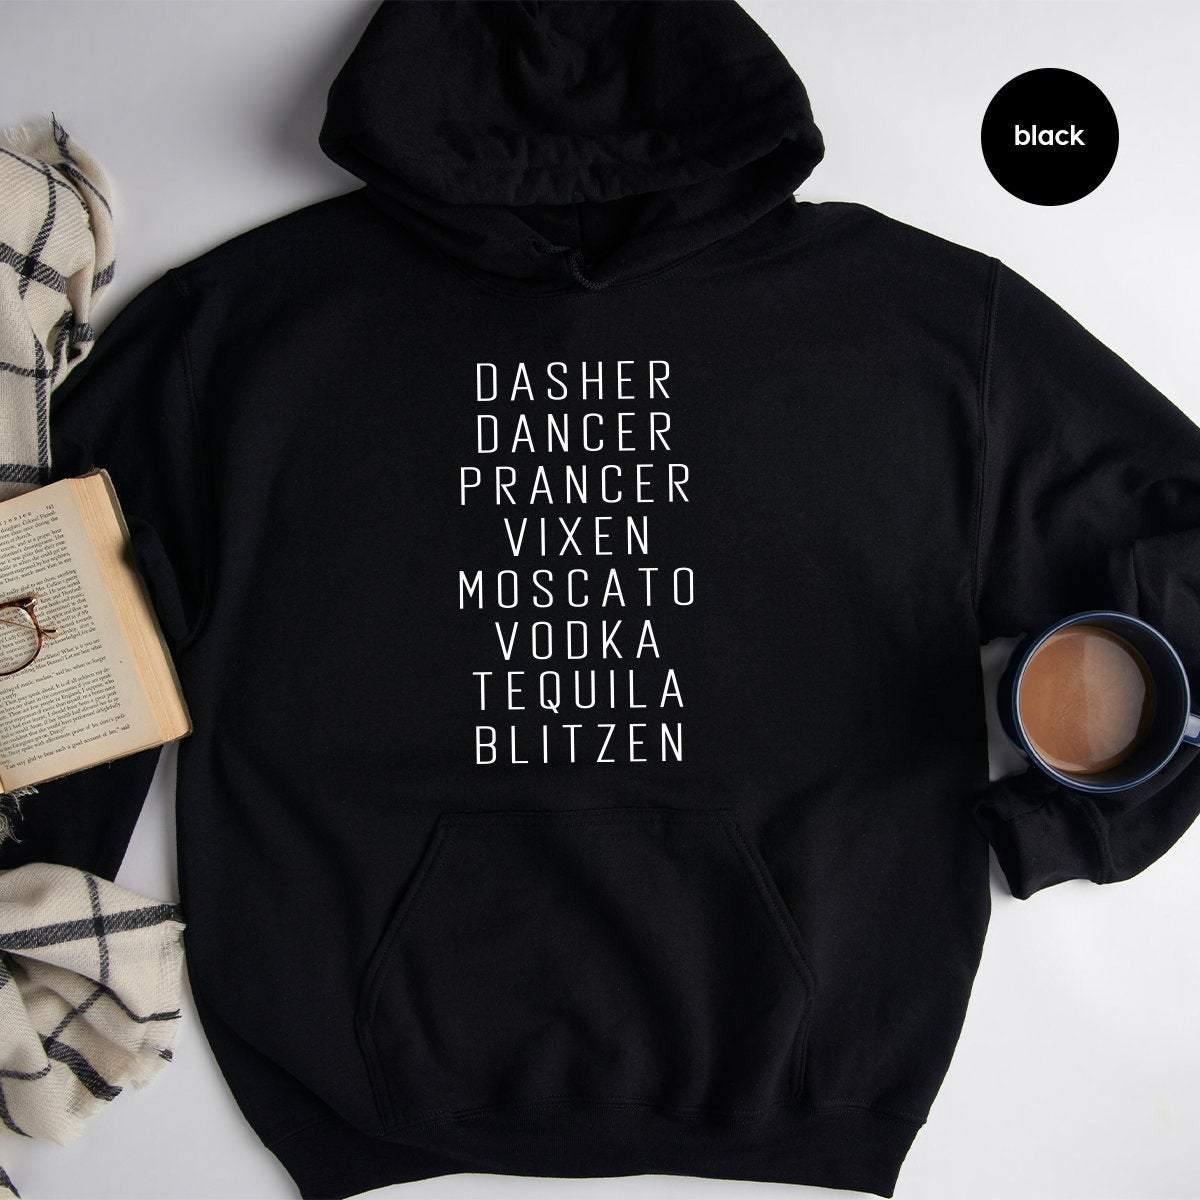 Funny Christmas Hoodie, Funny Drinking Hoodie, Funny Alcoholic Hoodie, Drinking Party Tee, Dasher Dancer Prancer Vixen Moscato Vodka Tequila - Fastdeliverytees.com